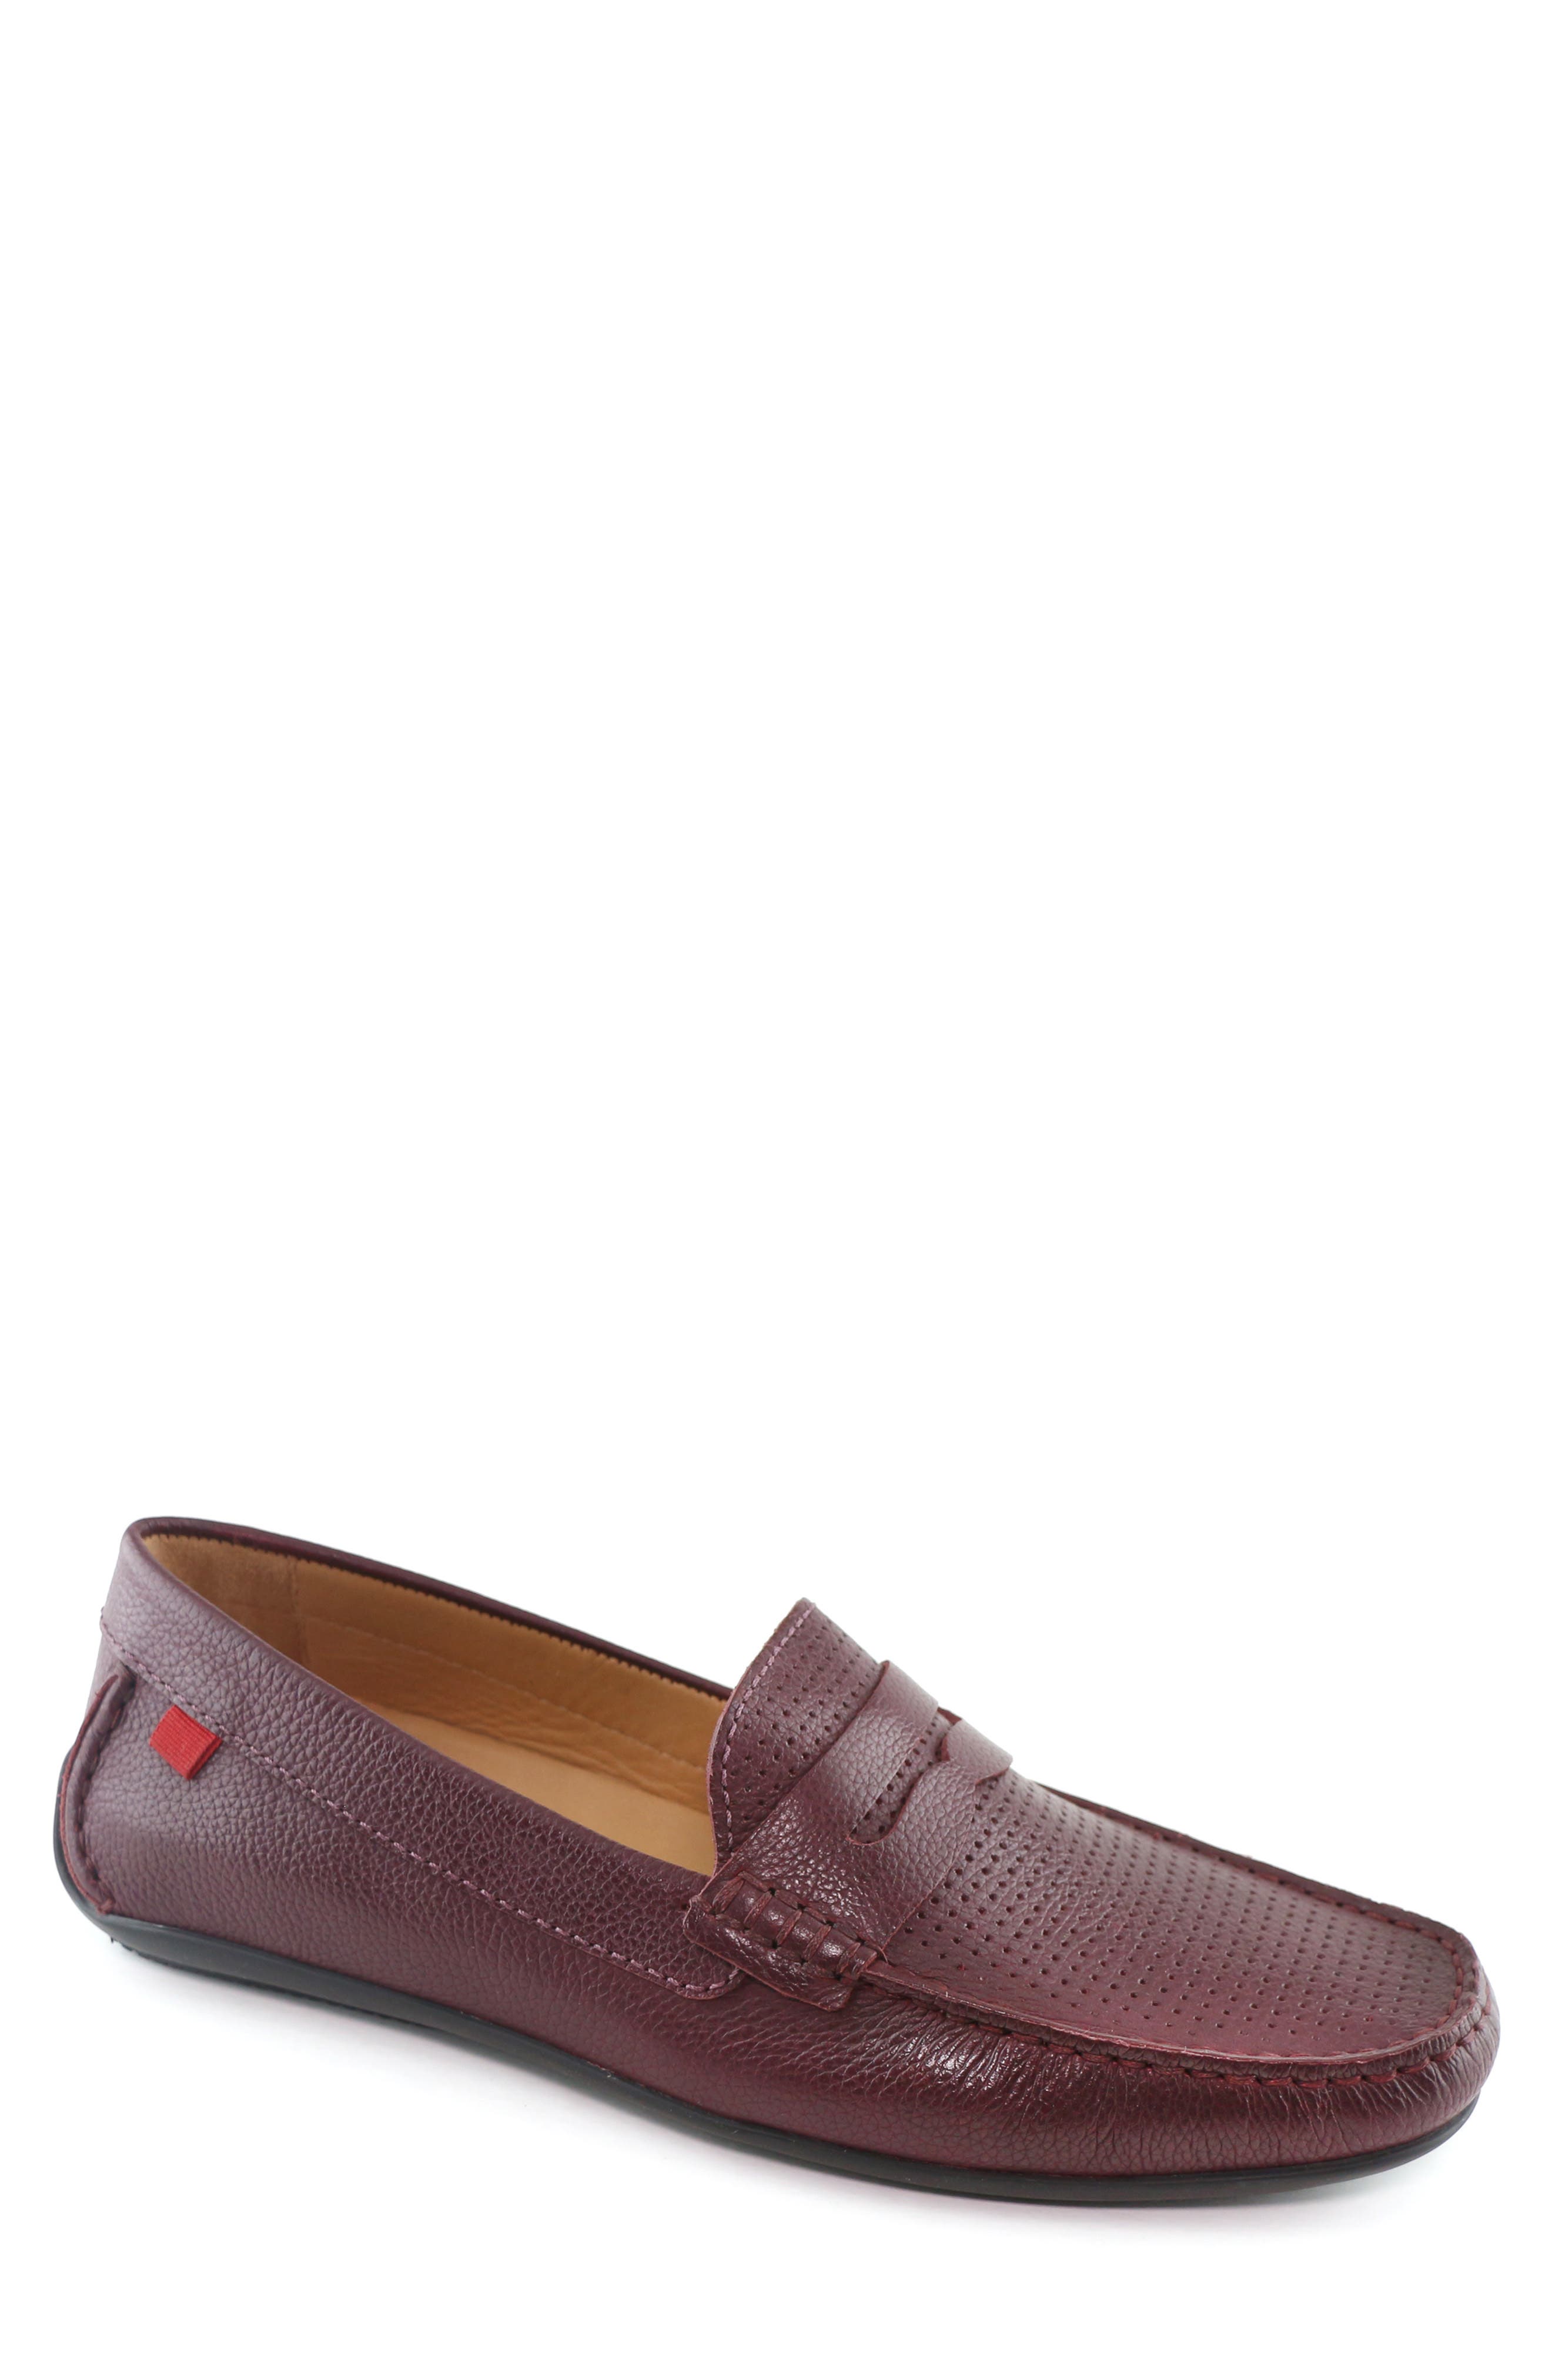 mens loafers sale